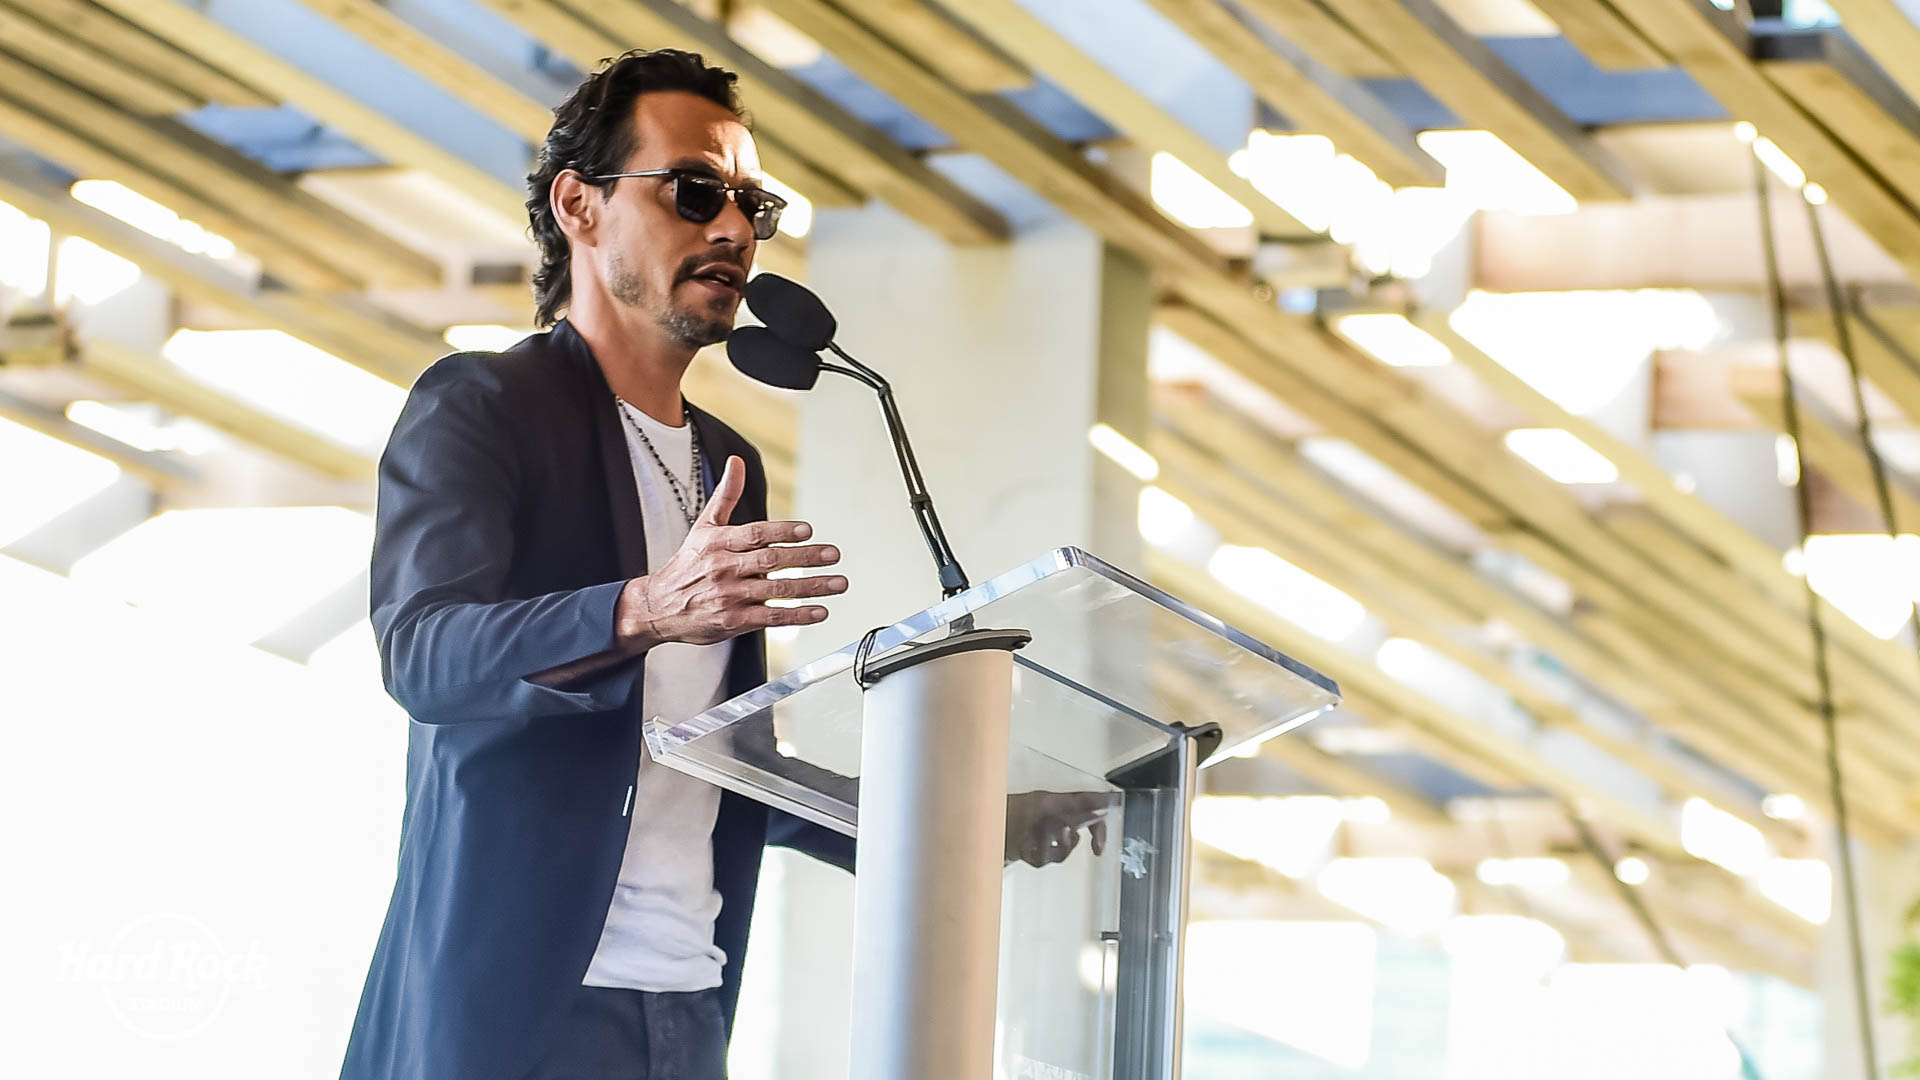 Marc Anthony to Headline International Champions Cup First Ever Halftime Show at El Clásico Miami